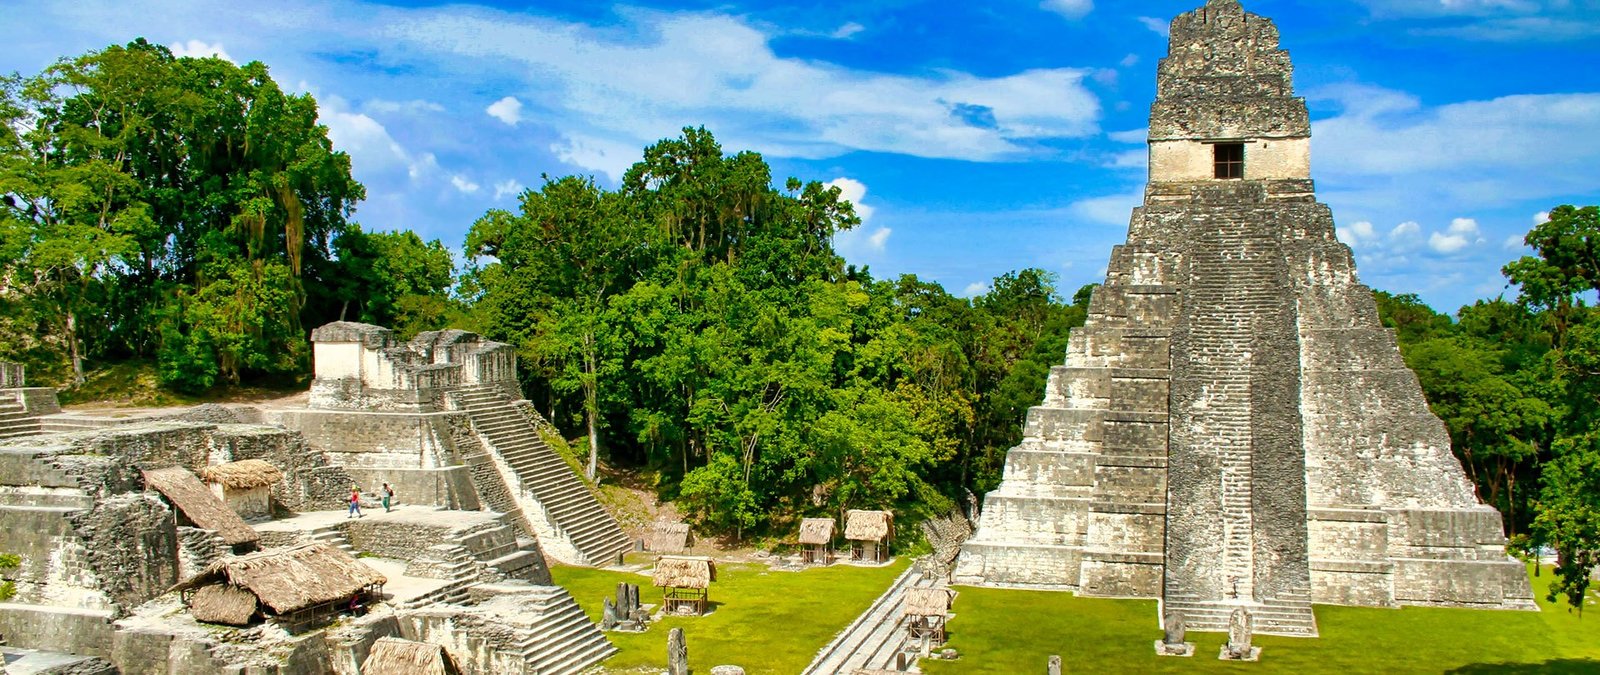 Mayan World Travel Destinations © 2021 Authentic Travel All Rights Reserved